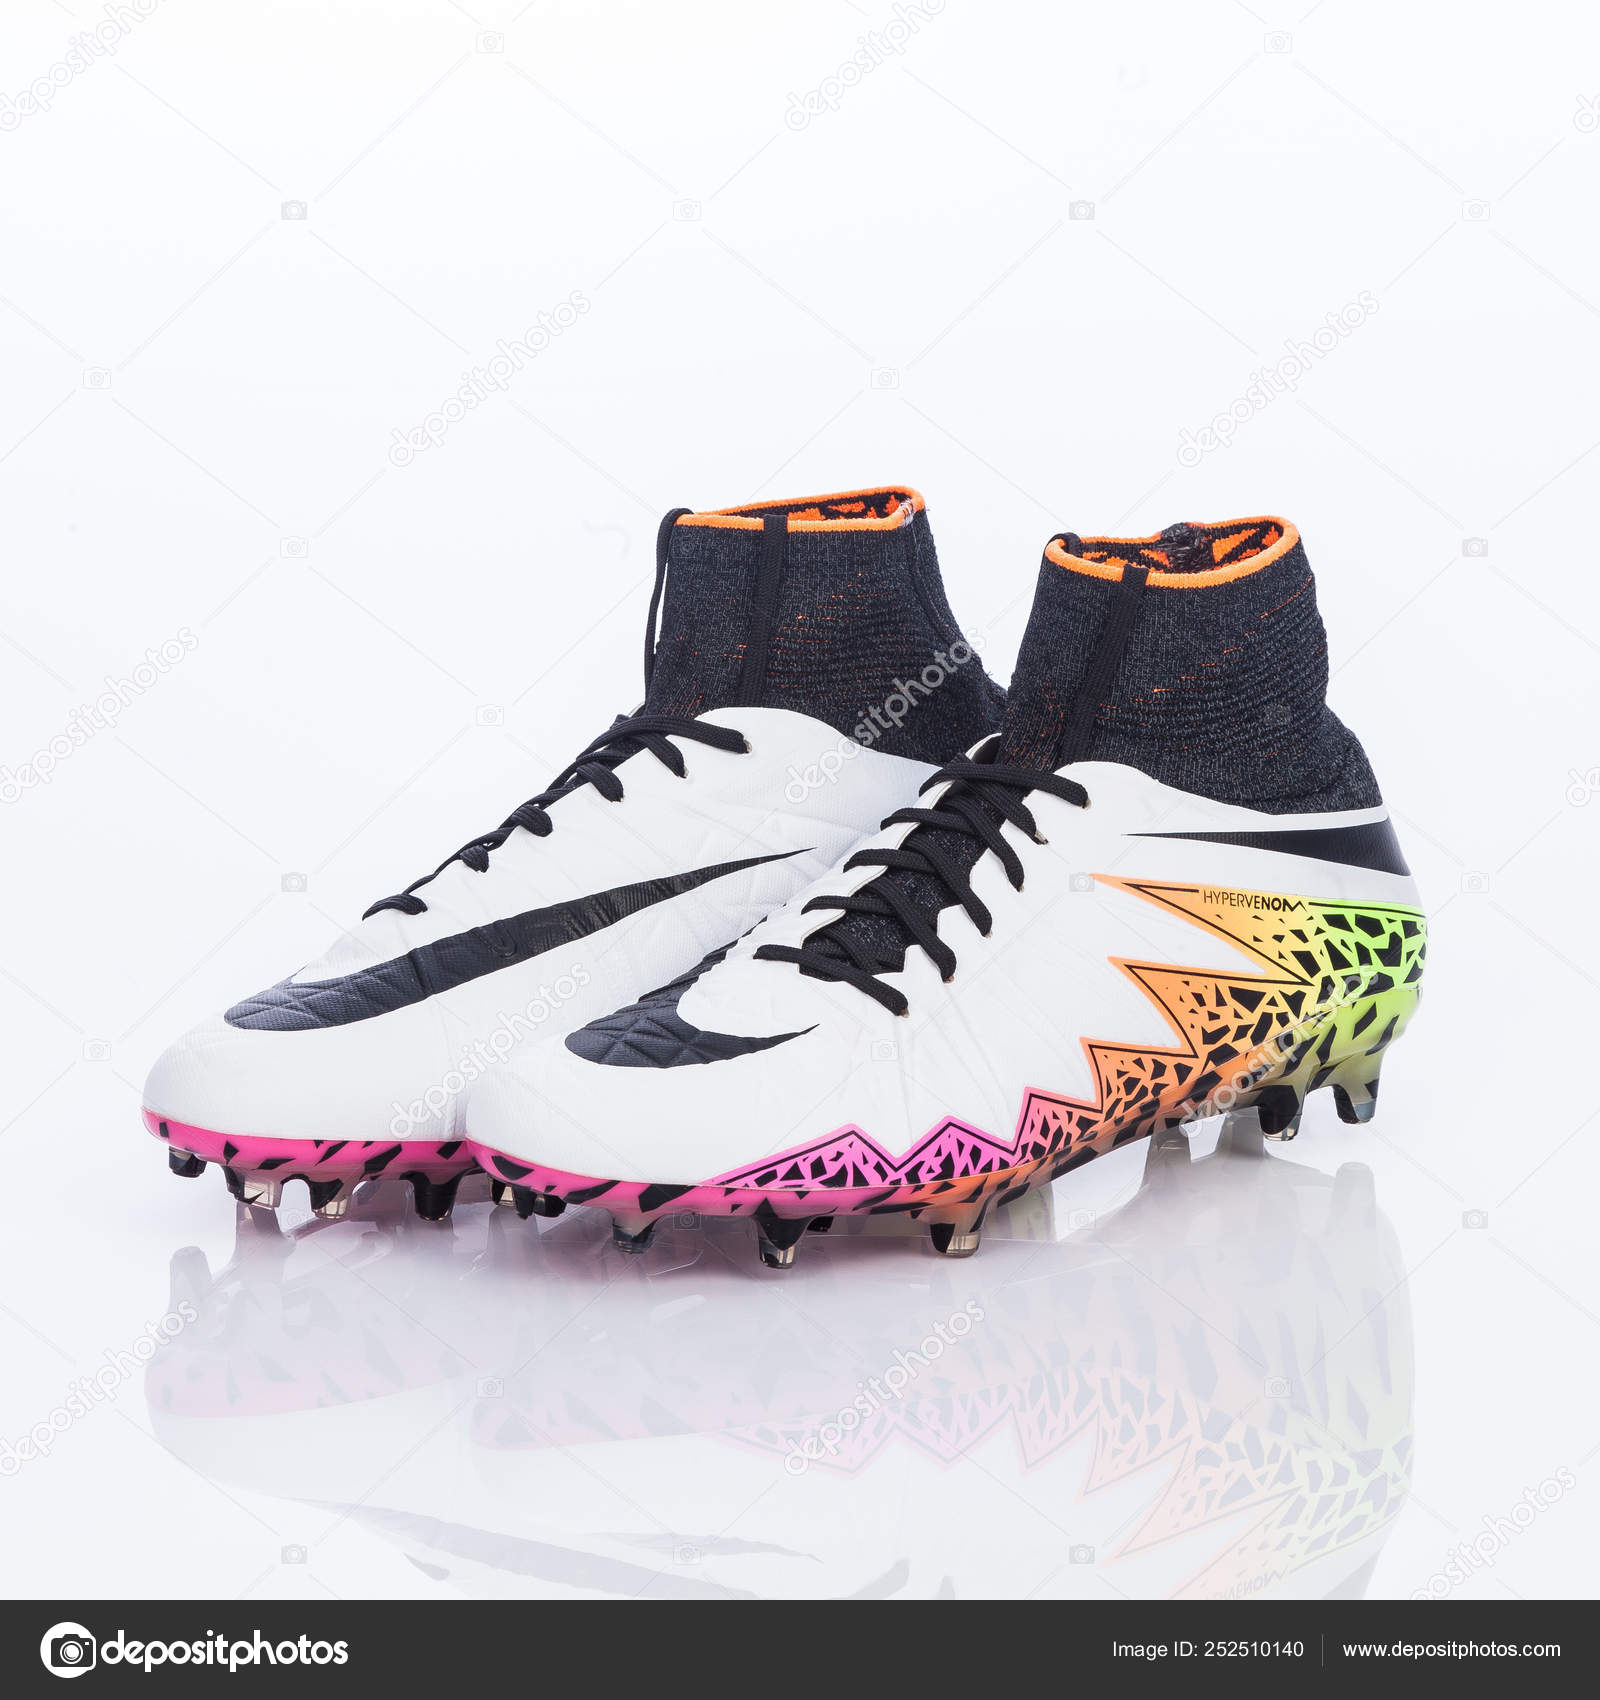 soccer shoes 2019